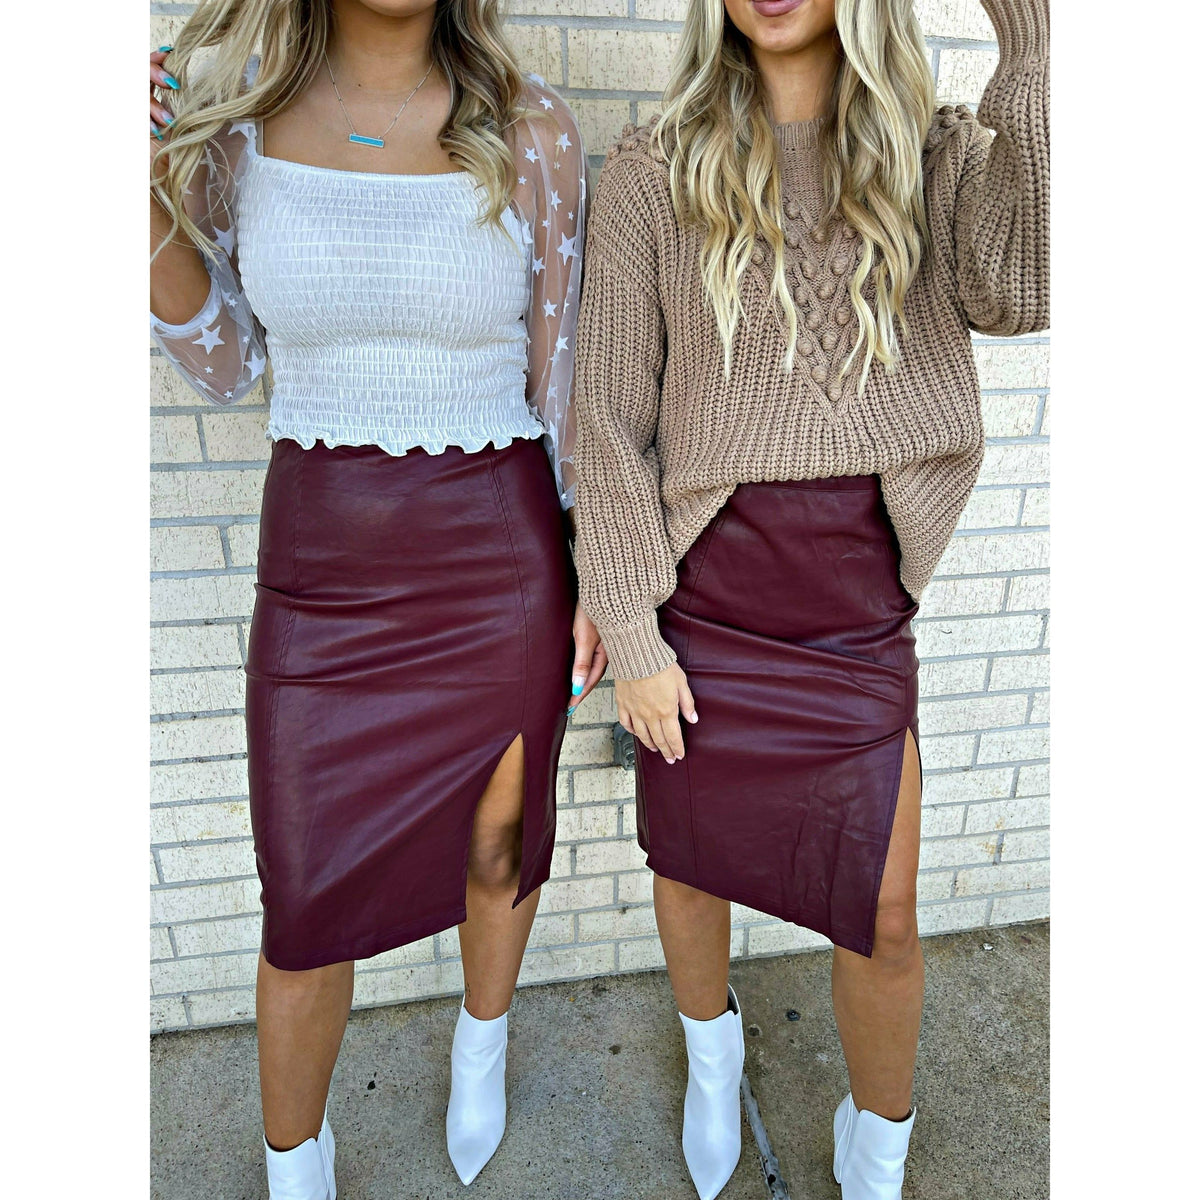 Whitley Burgundy Faux Leather Skirt